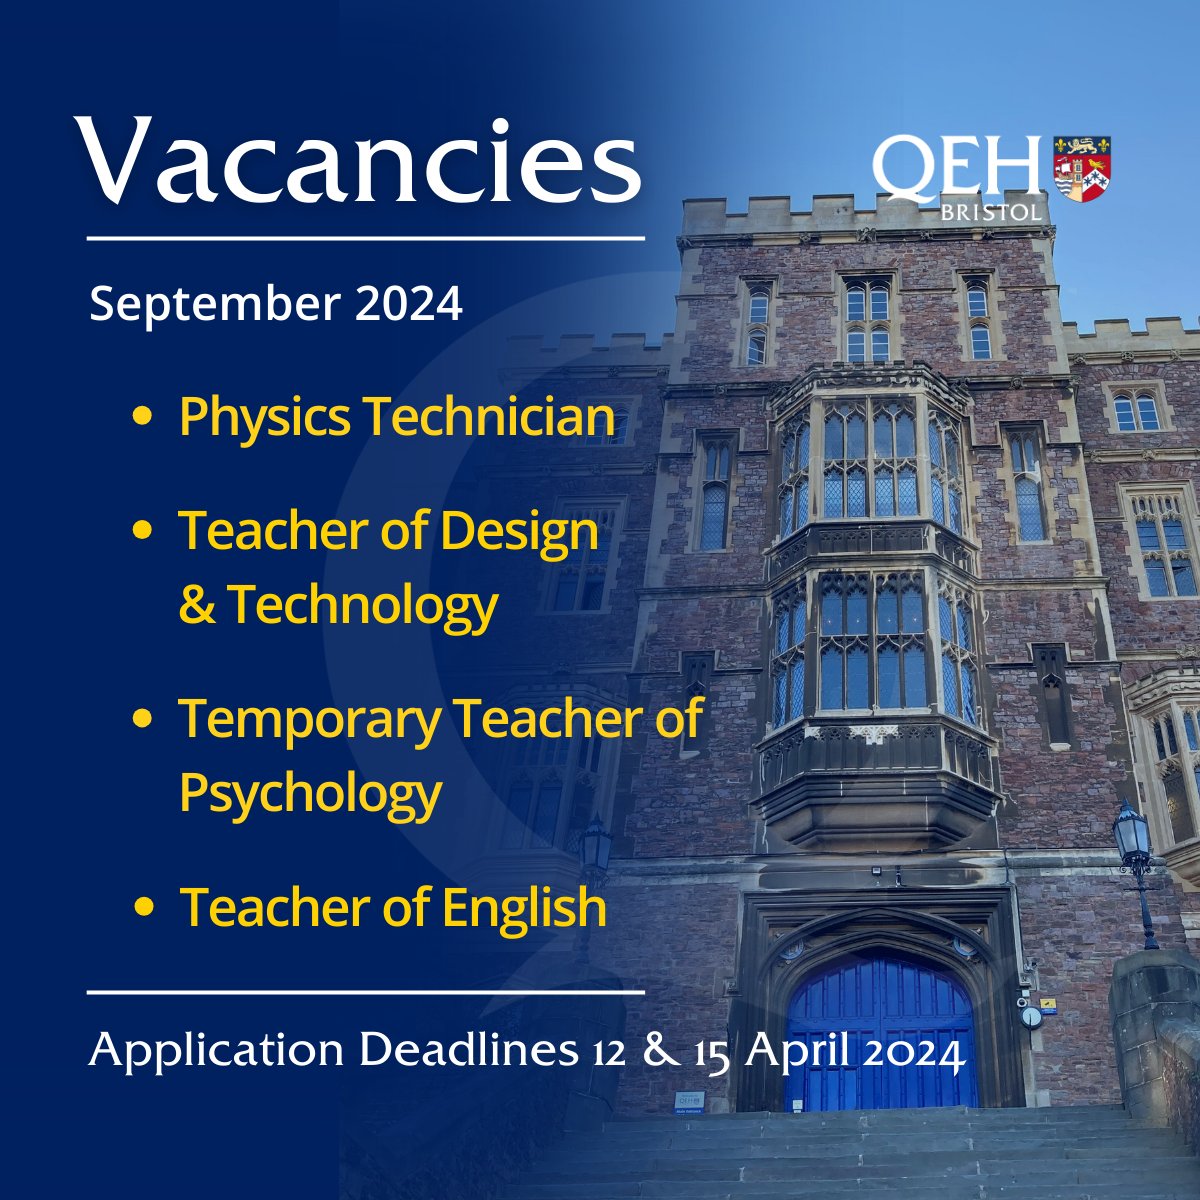 🌟 Join Our Team! 🌟 We're recruiting for multiple exciting positions here at QEH School. To learn more: qehbristol.co.uk/about/vacancie… #BristolJobs #TeacherJobs #Careers #QEHVacancies